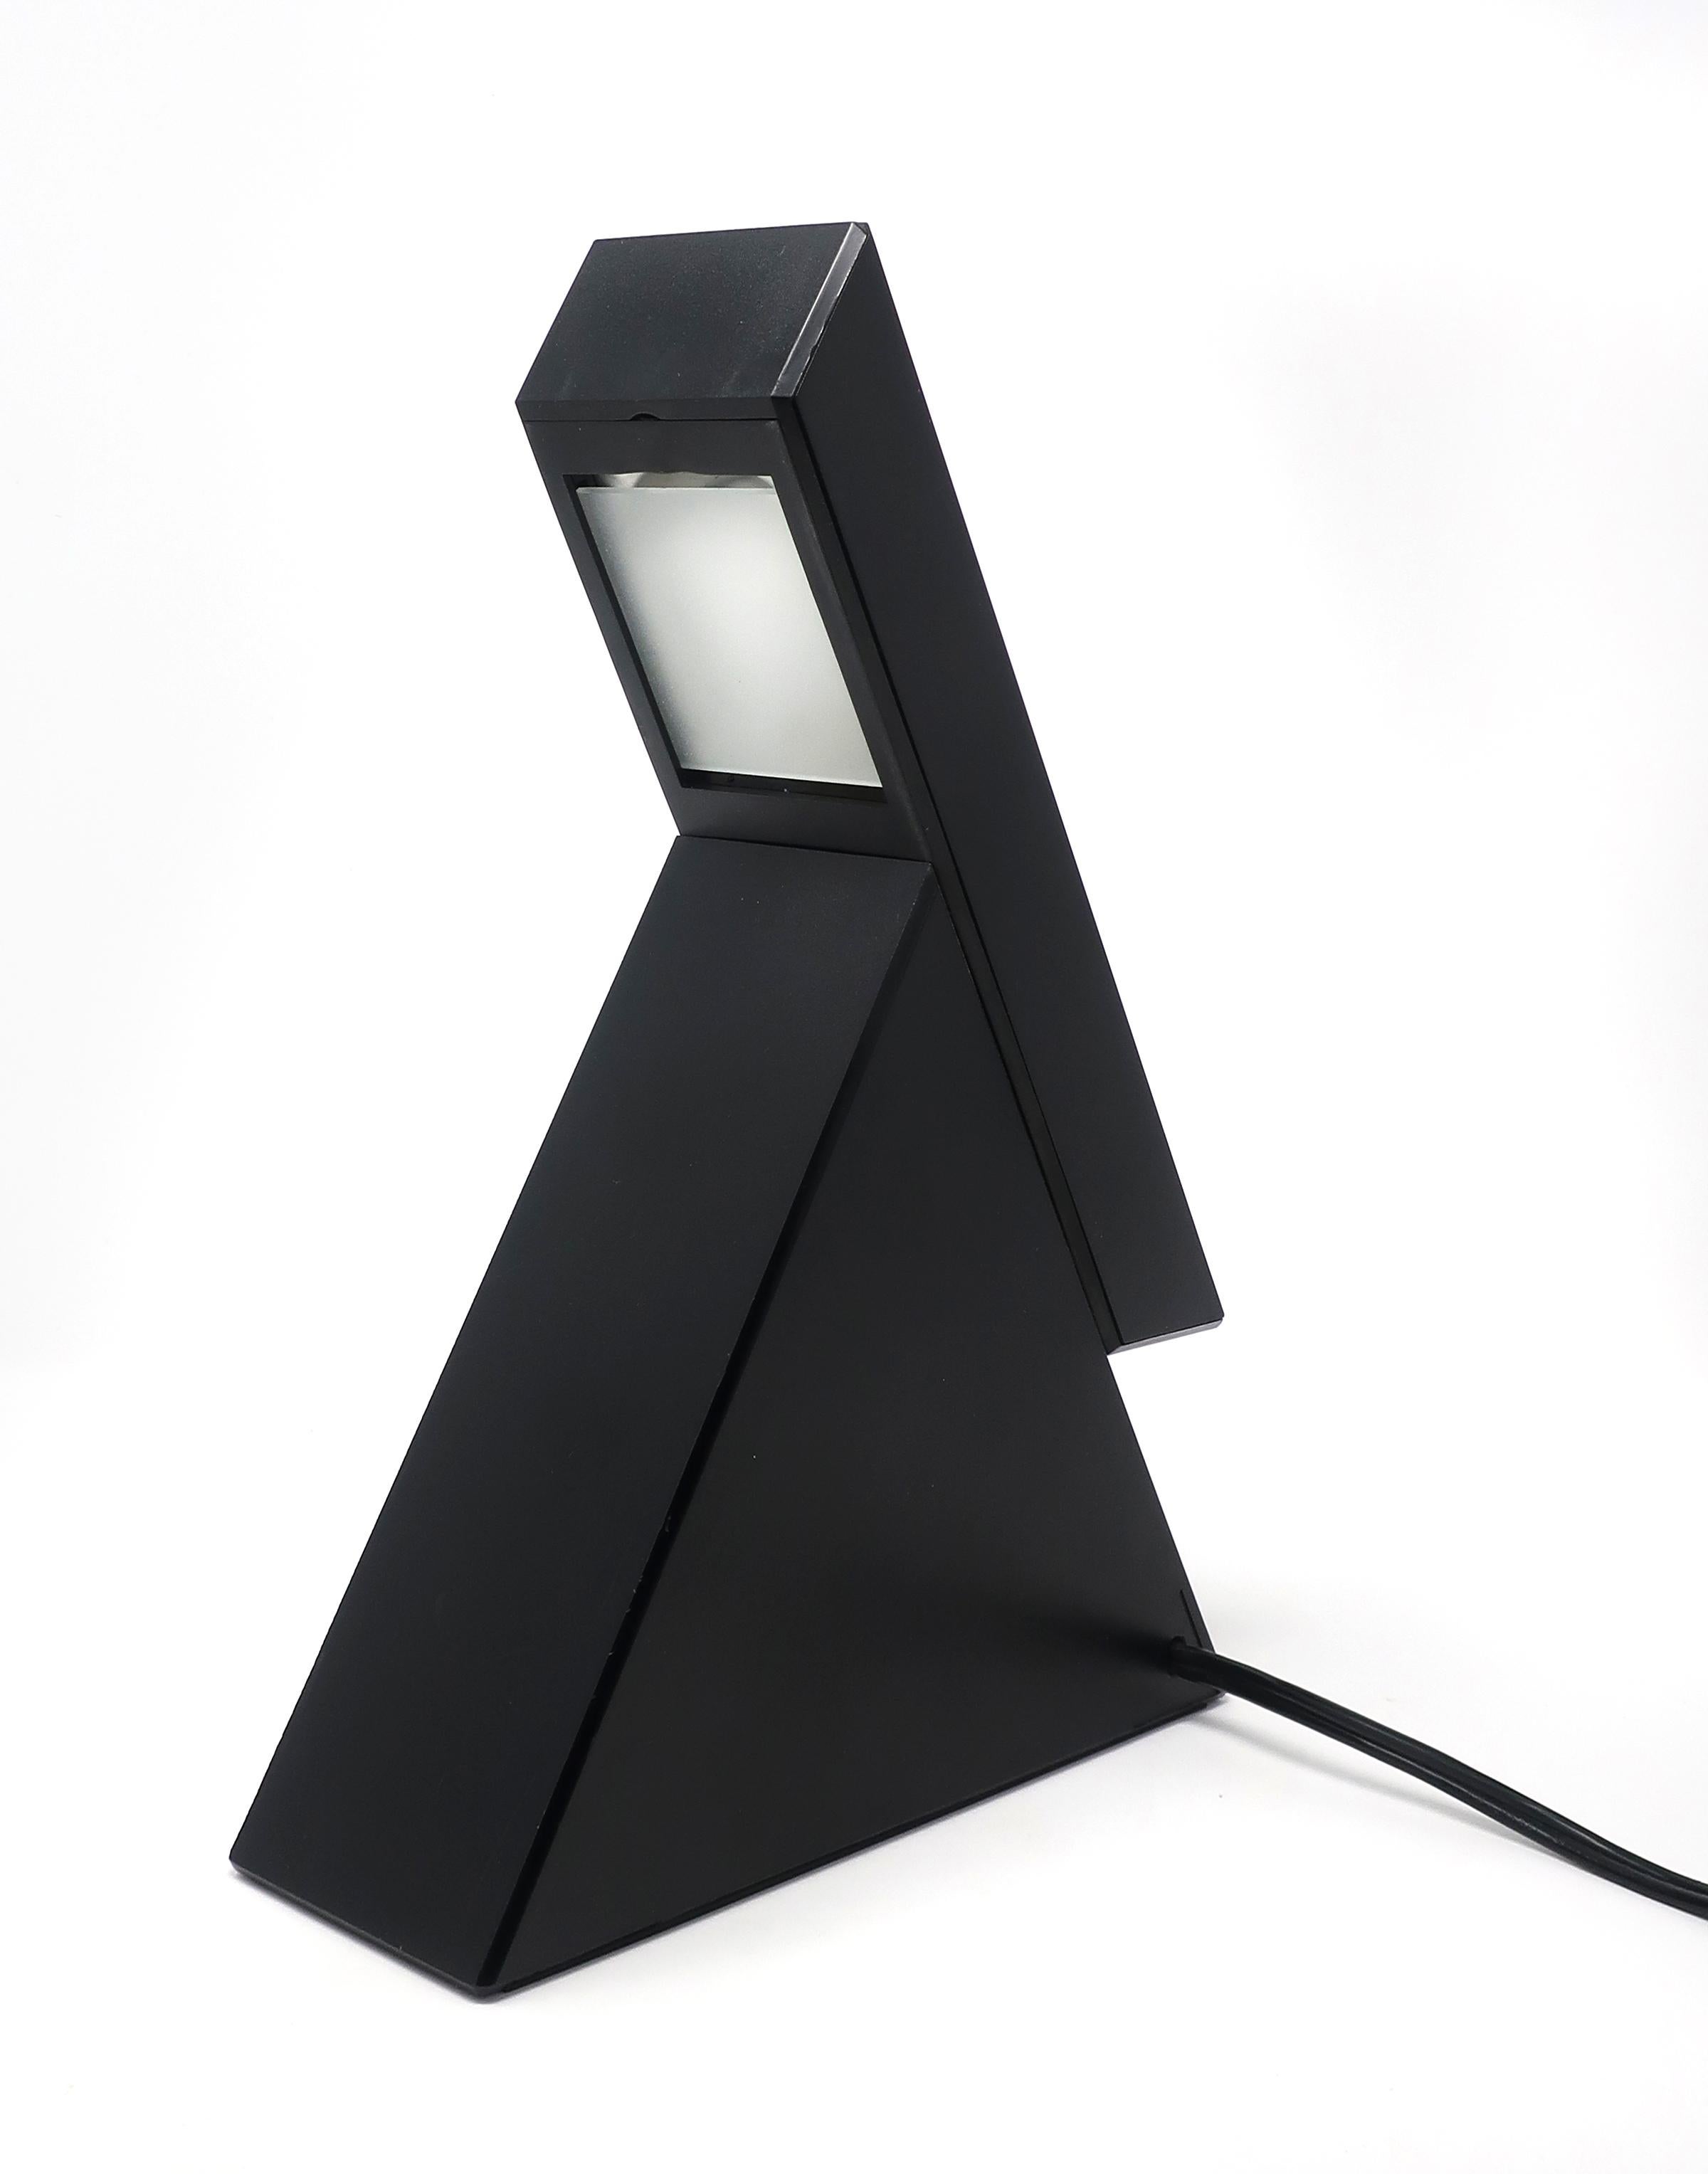 A geometric Postmodern table lamp designed by Mario Bertorelle for JM RDM Massanzago Italy. Lamp turns on by sliding the switch up to expose the bulb. It has 2 intensities, one low and one brighter when the cantilevered slide is extended all the